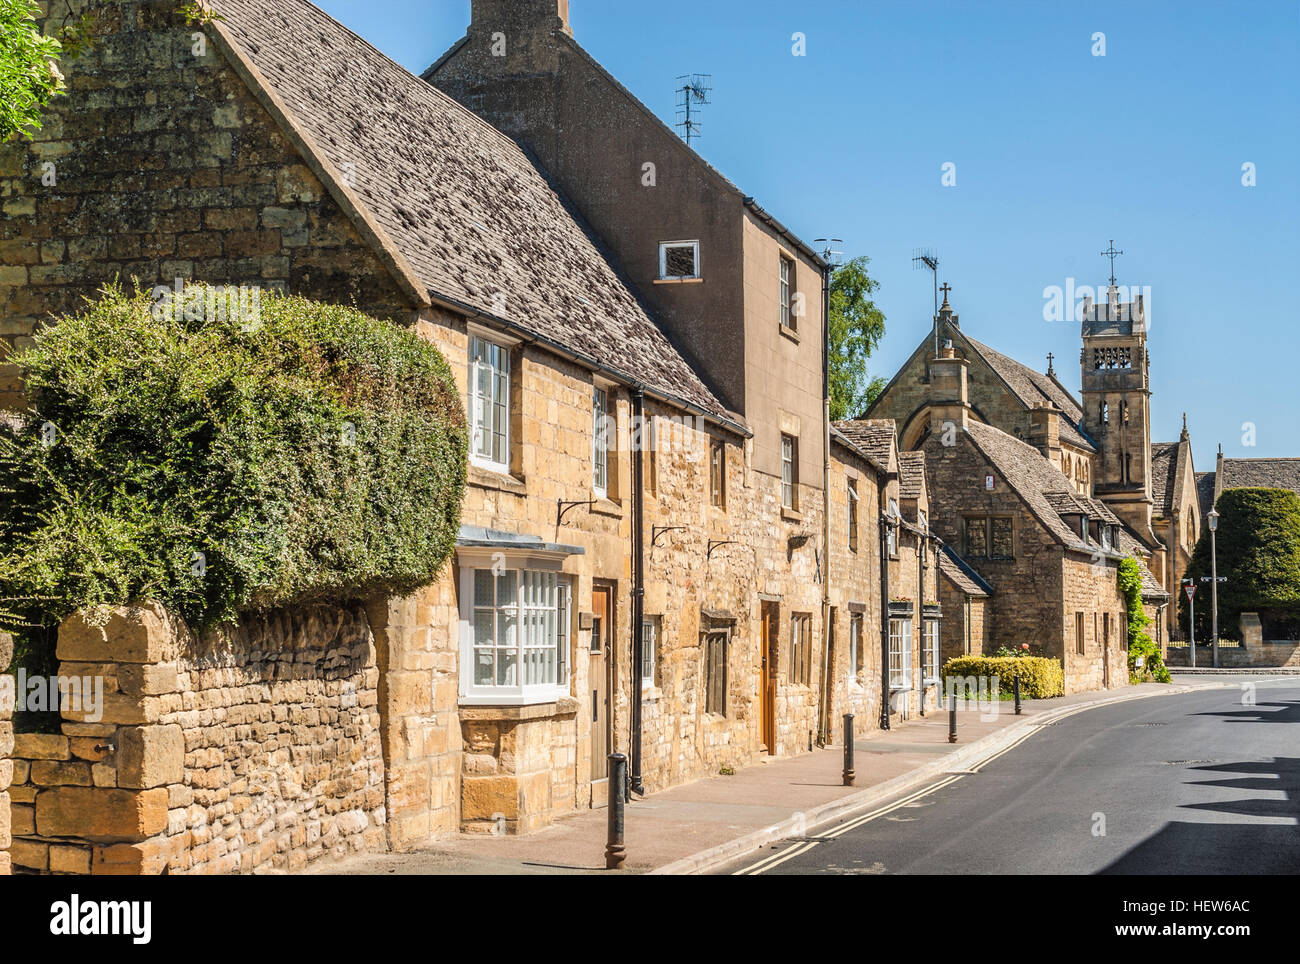 Cotsworld Cottage in Chipping Campden a small market town within the Cotswold district of Gloucestershire, England Stock Photo